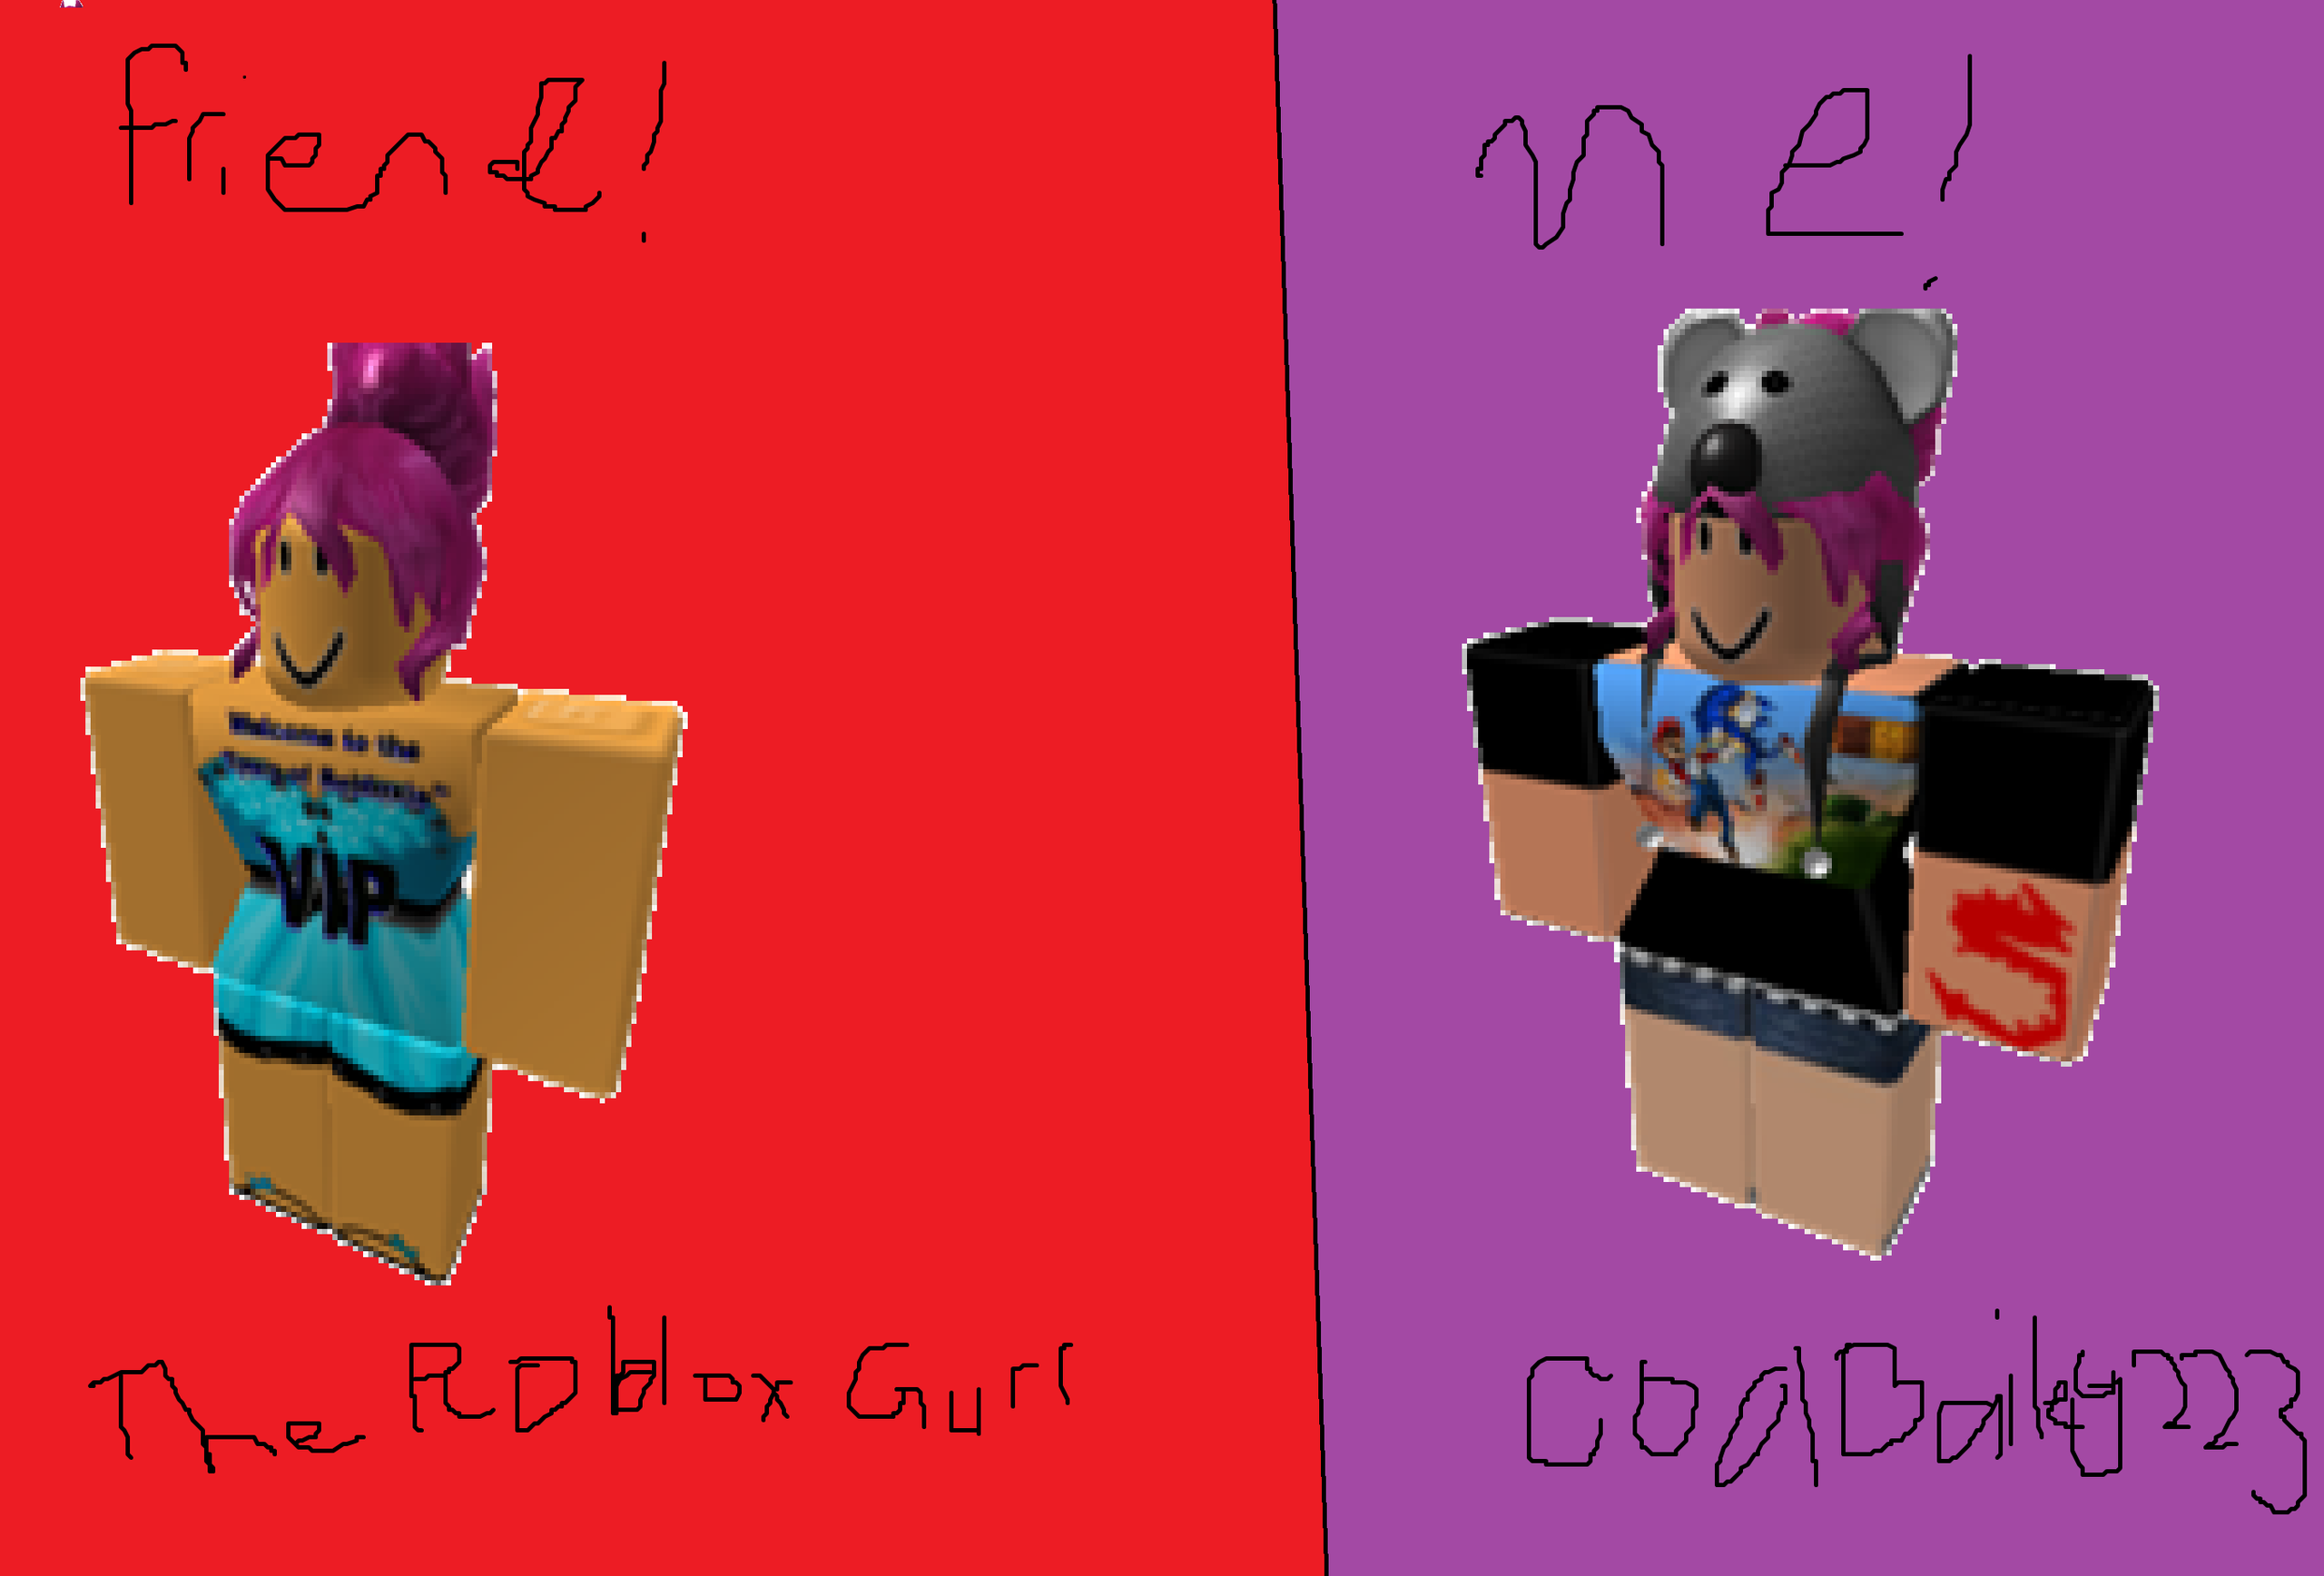 Cool Bailey223 And The Roblox Gurl Roblox Foto 29164175 Fanpop